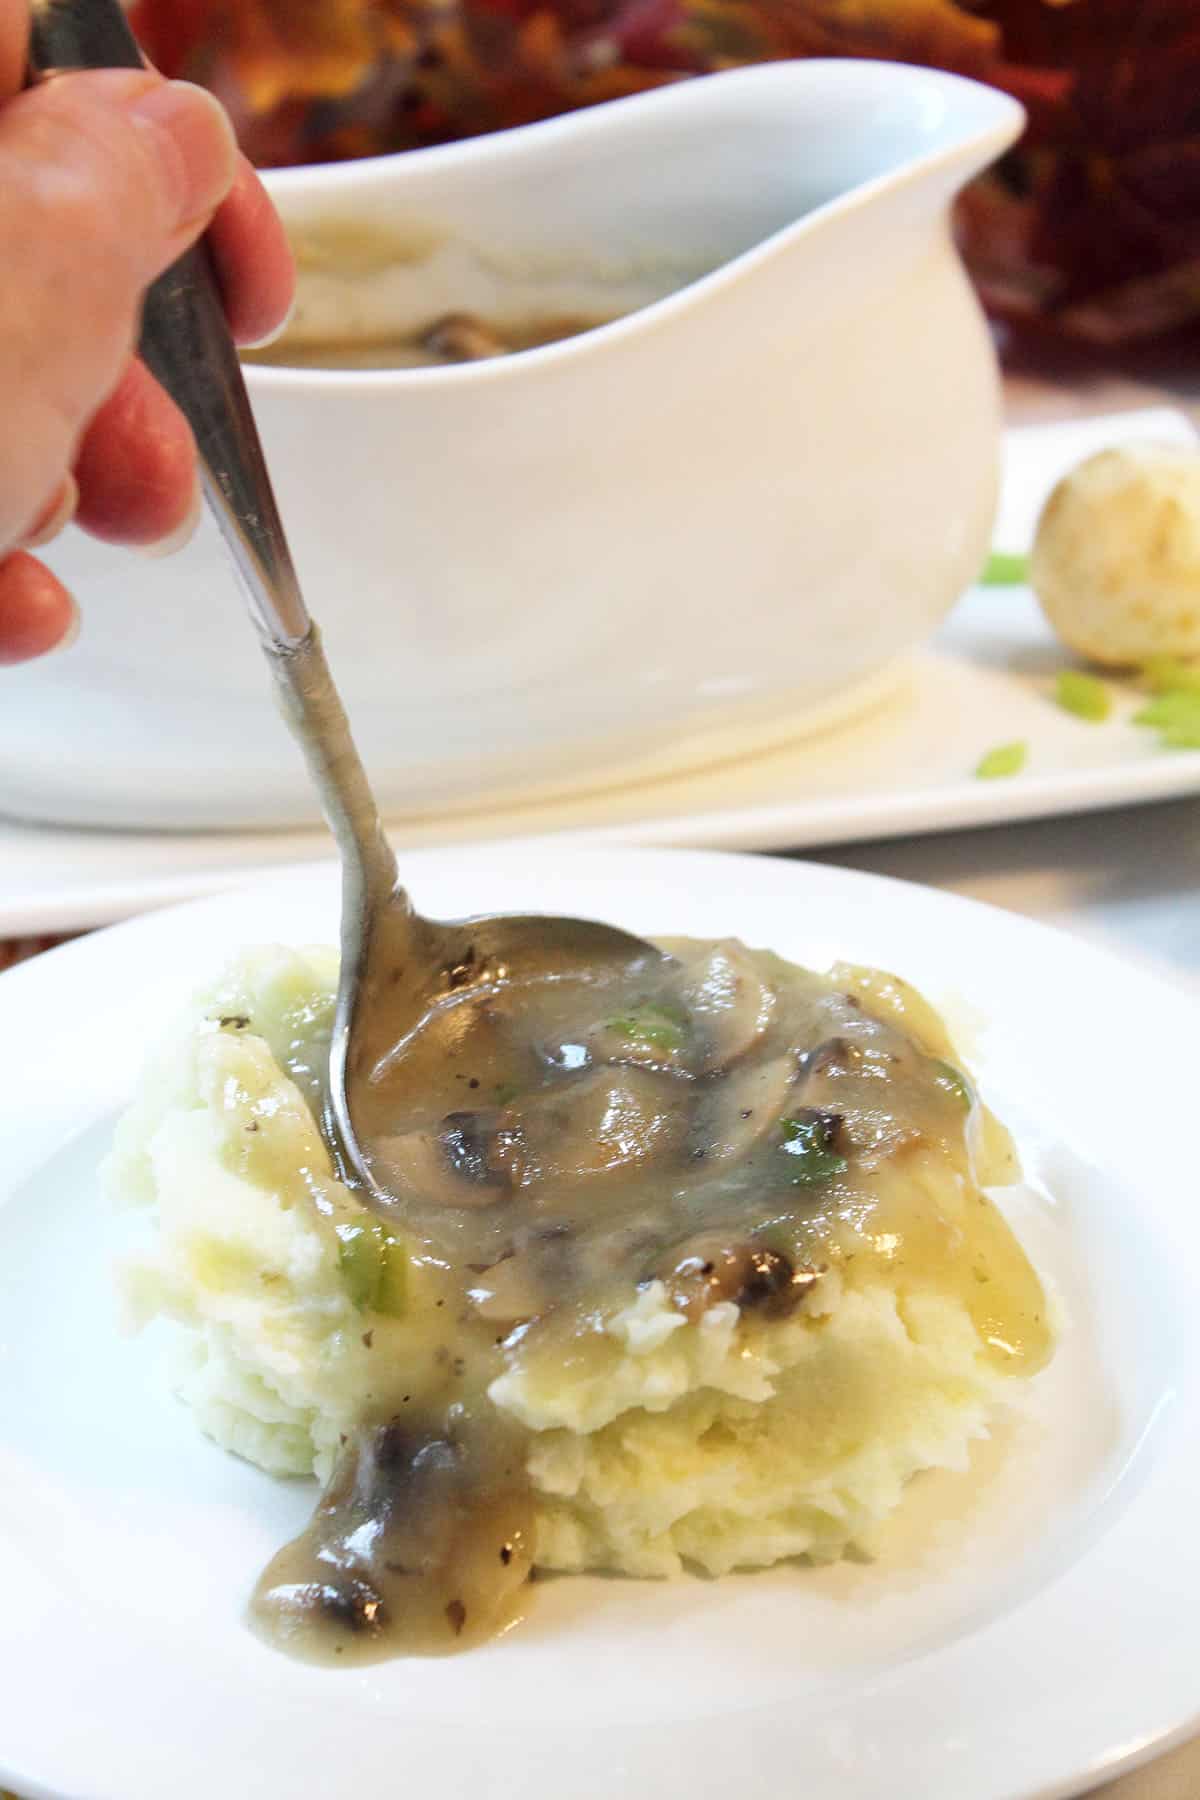 Ladling gravy into pile of mashed potatoes with gravy boat in background.